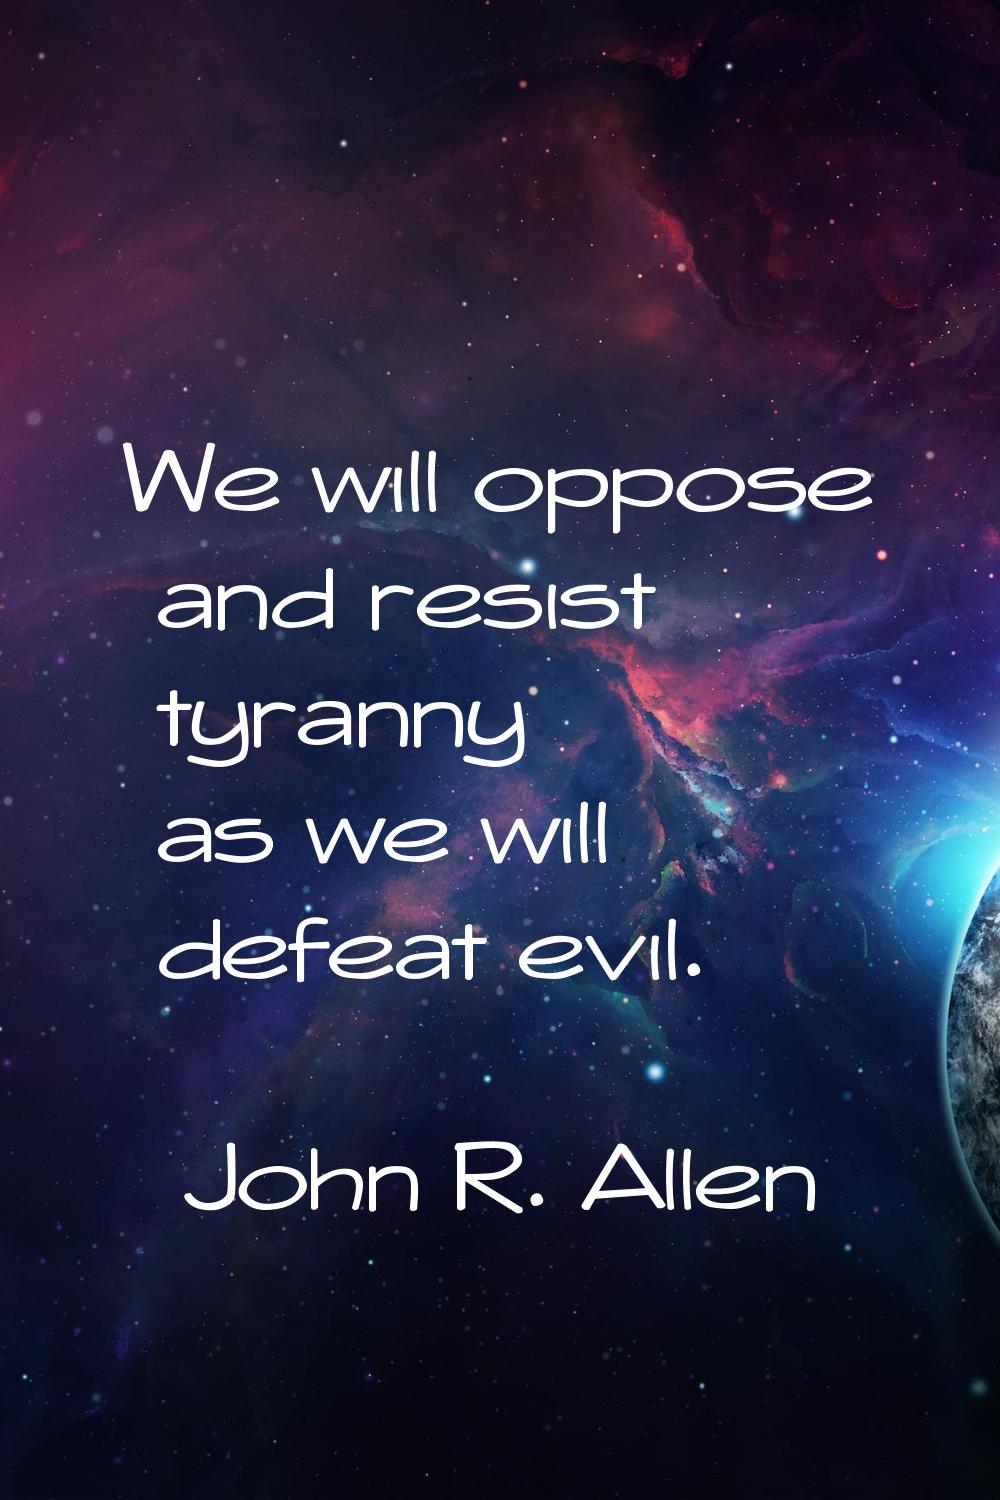 We will oppose and resist tyranny as we will defeat evil.